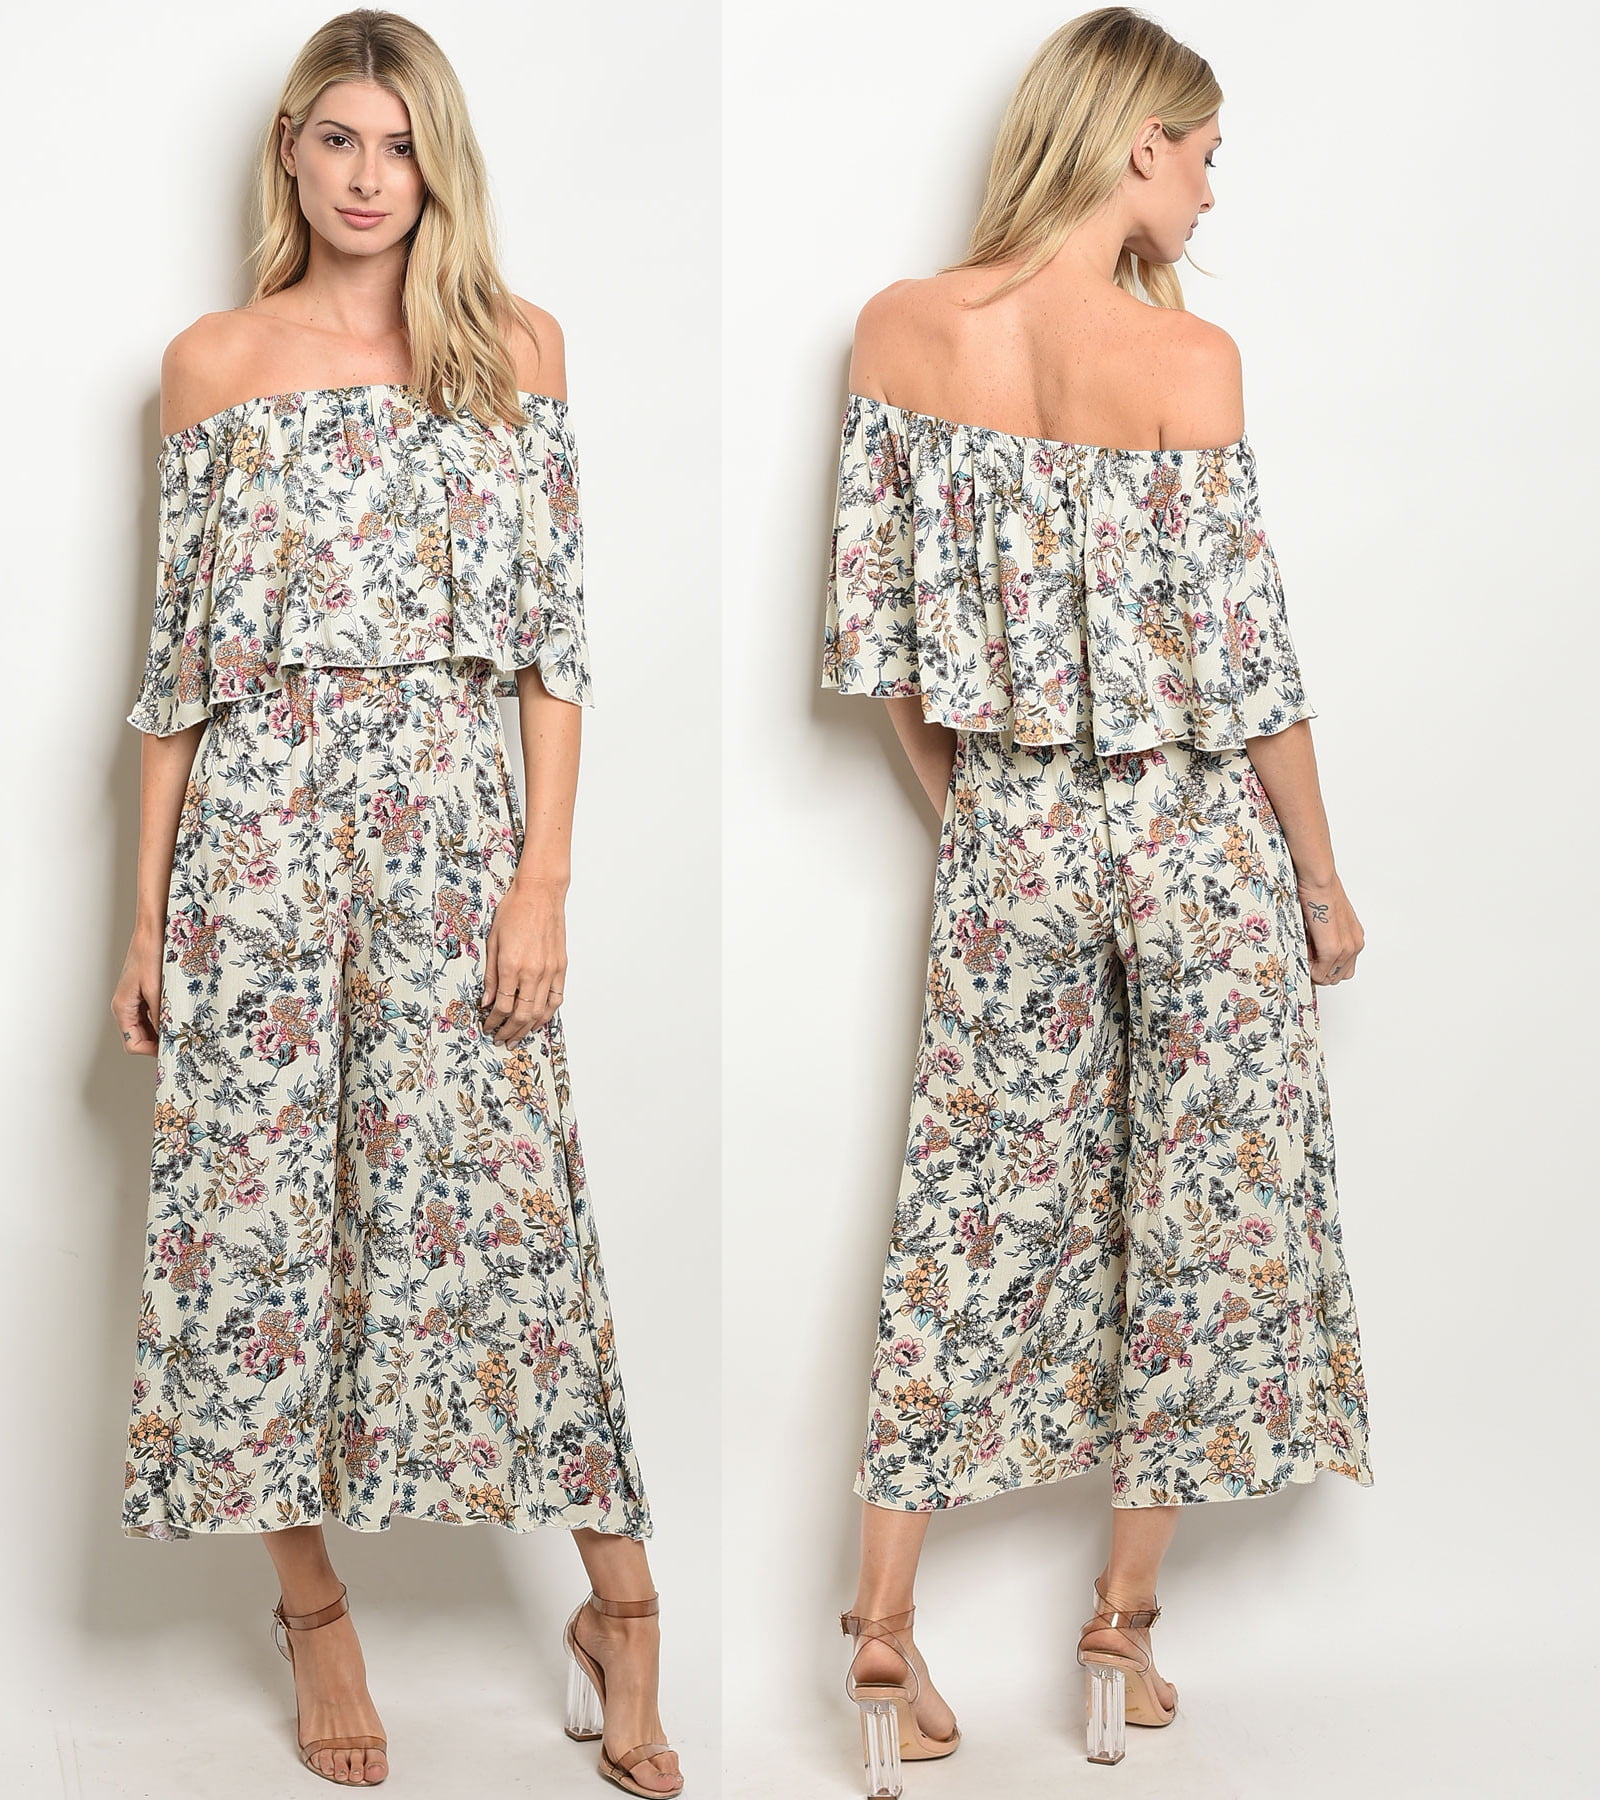 YFancy Women Long Jumpsuit Floral Printing Off Shoulder Sleeveless Off Shoulder Wide Leg Wrapped Chest Rompers Playsuit